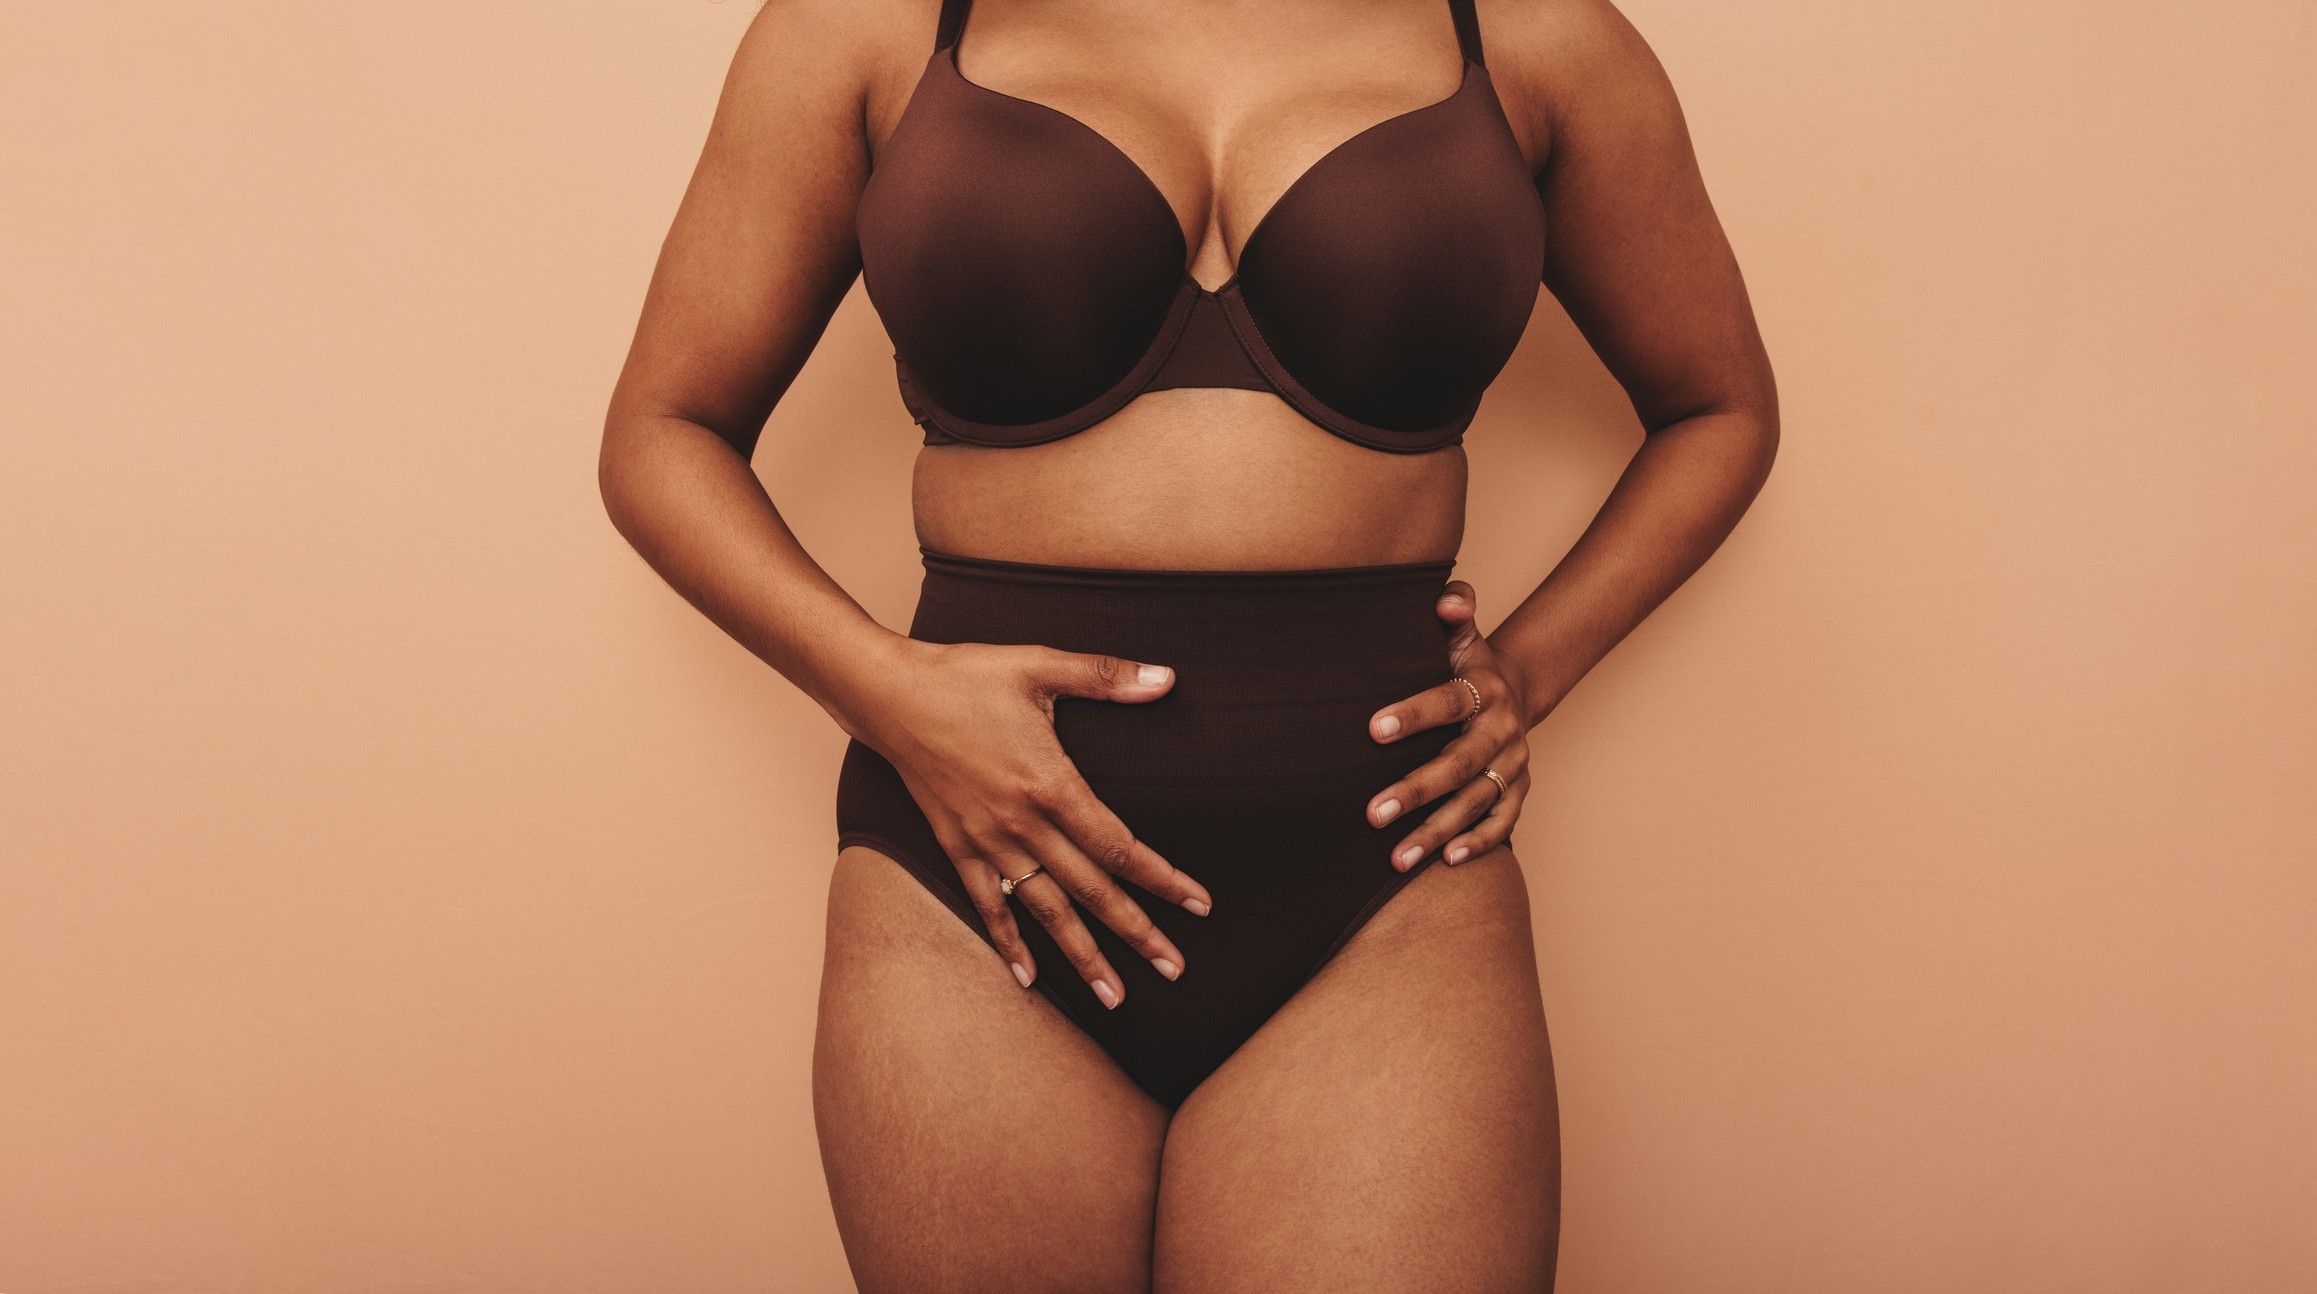 This Is Why I Got A Breast Reduction - xoNecole